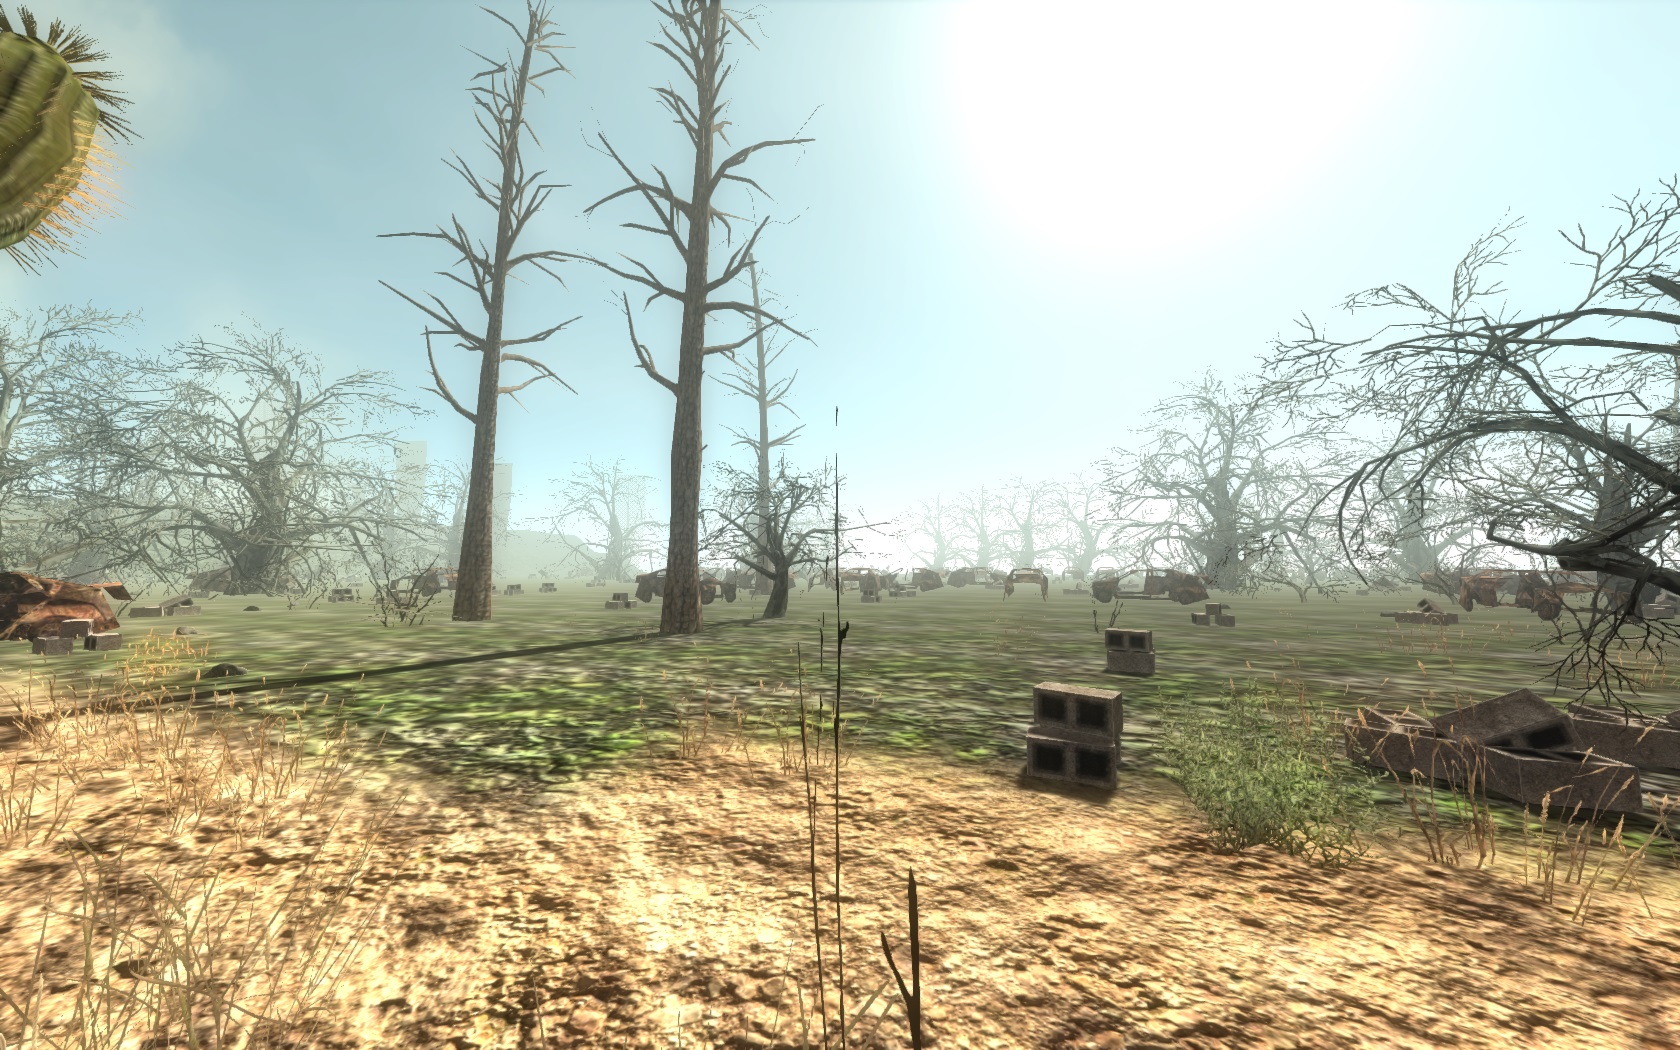 7 Days to Die BIOMES Guide - Nuclear Fallout Biome: